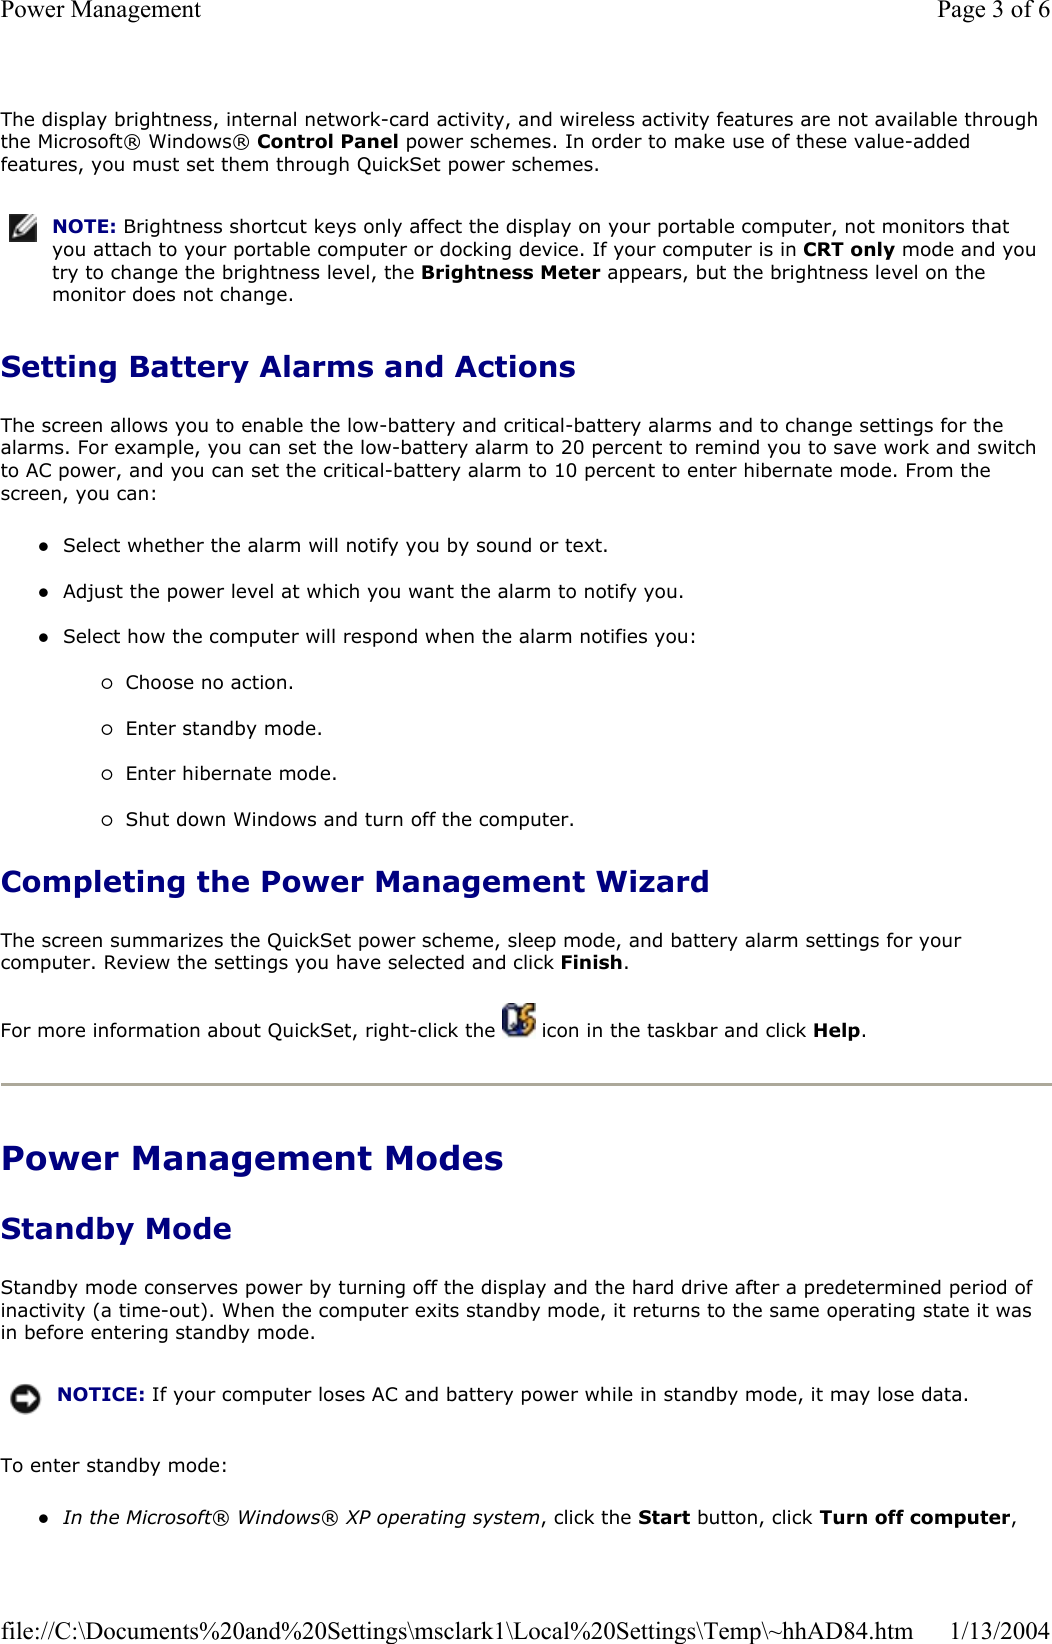 The display brightness, internal network-card activity, and wireless activity features are not available through the Microsoft® Windows® Control Panel power schemes. In order to make use of these value-added features, you must set them through QuickSet power schemes. Setting Battery Alarms and Actions The screen allows you to enable the low-battery and critical-battery alarms and to change settings for the alarms. For example, you can set the low-battery alarm to 20 percent to remind you to save work and switch to AC power, and you can set the critical-battery alarm to 10 percent to enter hibernate mode. From the screen, you can: zSelect whether the alarm will notify you by sound or text. zAdjust the power level at which you want the alarm to notify you. zSelect how the computer will respond when the alarm notifies you: {Choose no action. {Enter standby mode. {Enter hibernate mode. {Shut down Windows and turn off the computer. Completing the Power Management Wizard The screen summarizes the QuickSet power scheme, sleep mode, and battery alarm settings for your computer. Review the settings you have selected and click Finish.For more information about QuickSet, right-click the   icon in the taskbar and click Help.Power Management Modes Standby Mode Standby mode conserves power by turning off the display and the hard drive after a predetermined period of inactivity (a time-out). When the computer exits standby mode, it returns to the same operating state it was in before entering standby mode. To enter standby mode: zIn the Microsoft®Windows® XP operating system, click the Start button, click Turn off computer,NOTE: Brightness shortcut keys only affect the display on your portable computer, not monitors that you attach to your portable computer or docking device. If your computer is in CRT only mode and you try to change the brightness level, the Brightness Meter appears, but the brightness level on the monitor does not change.NOTICE: If your computer loses AC and battery power while in standby mode, it may lose data.Page 3 of 6Power Management1/13/2004file://C:\Documents%20and%20Settings\msclark1\Local%20Settings\Temp\~hhAD84.htm